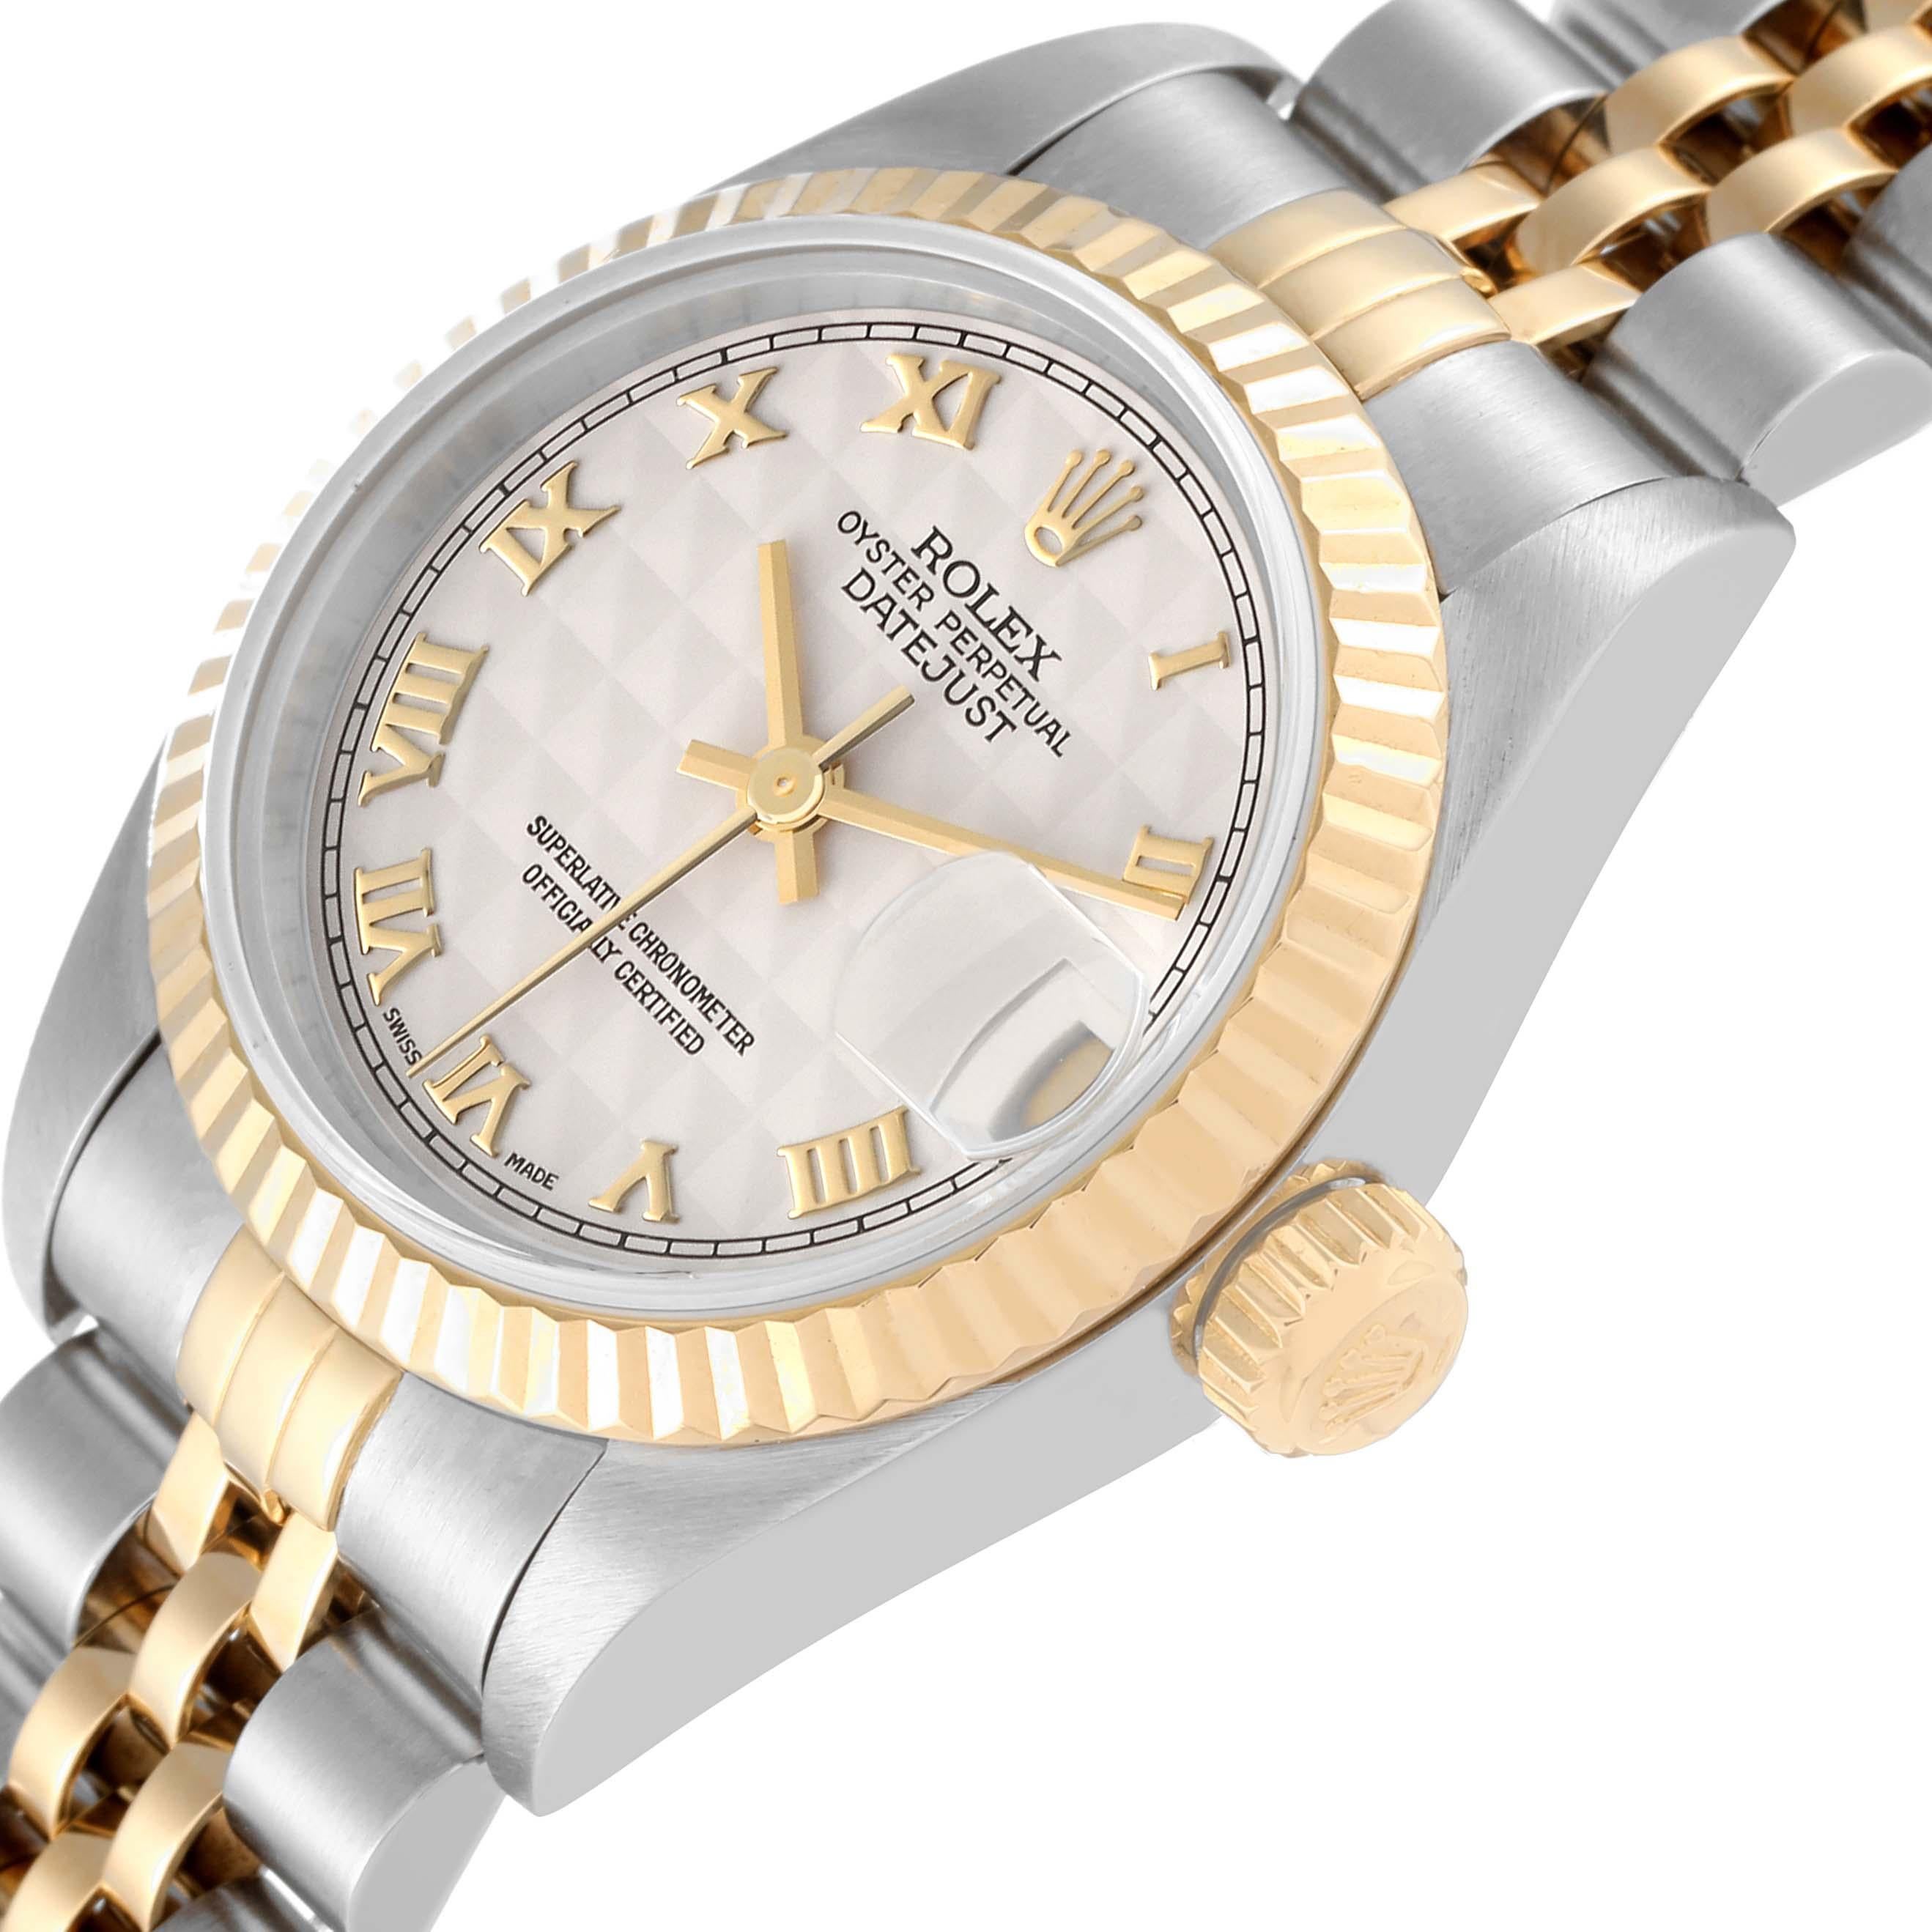 Women's Rolex Datejust Steel Yellow Gold Ivory Pyramid Dial Ladies Watch 69173